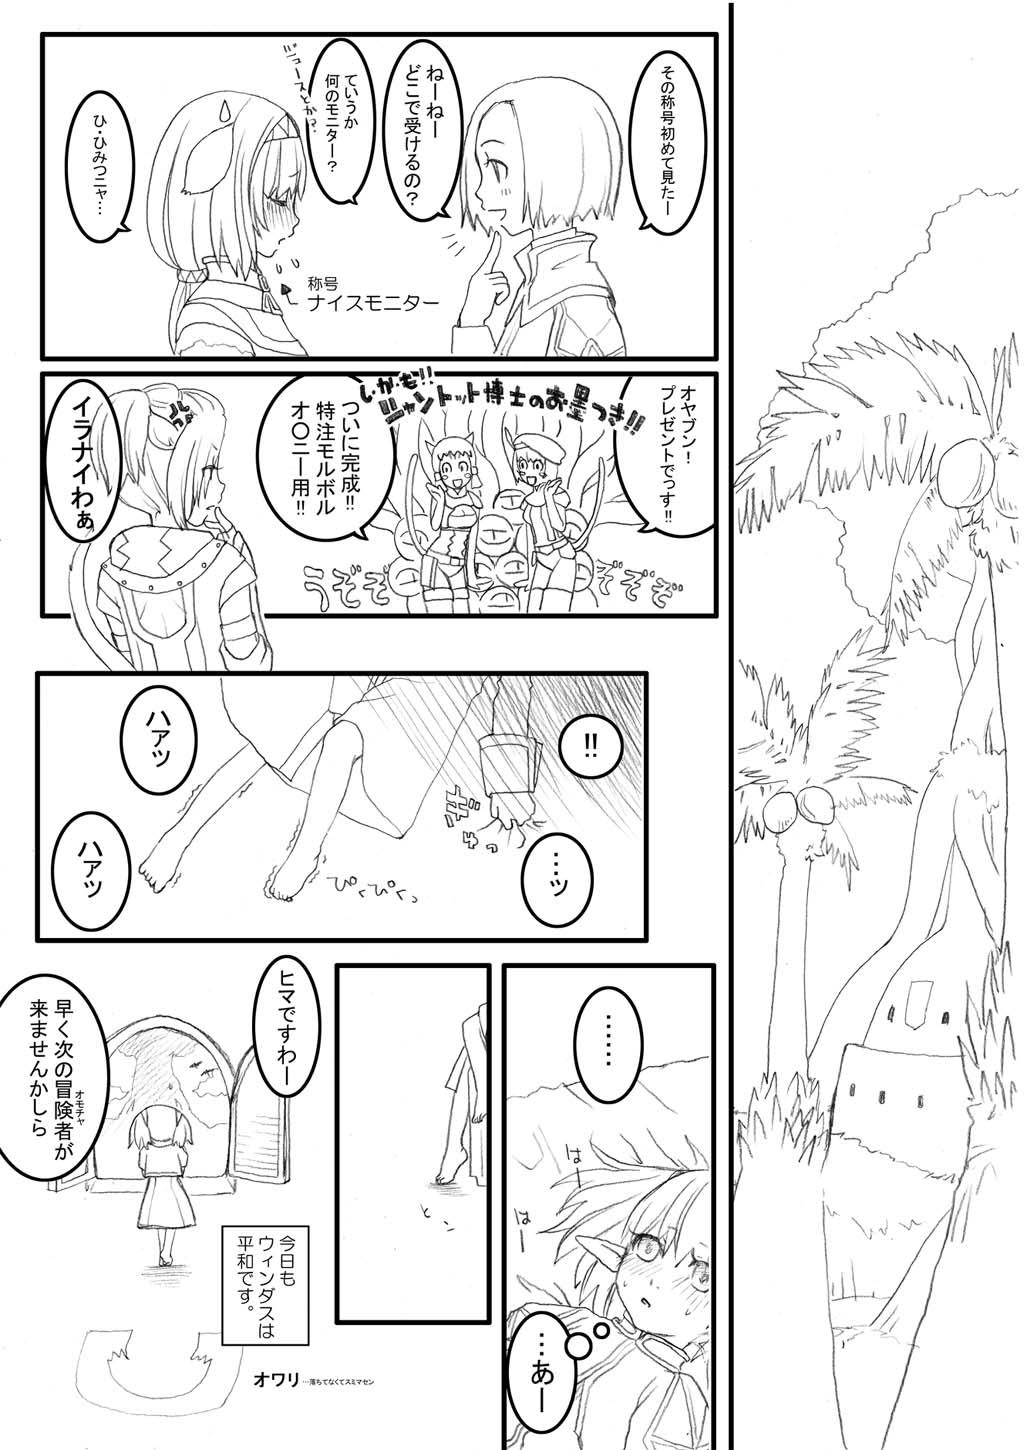 Butthole あれ - Final fantasy xi 4some - Page 6